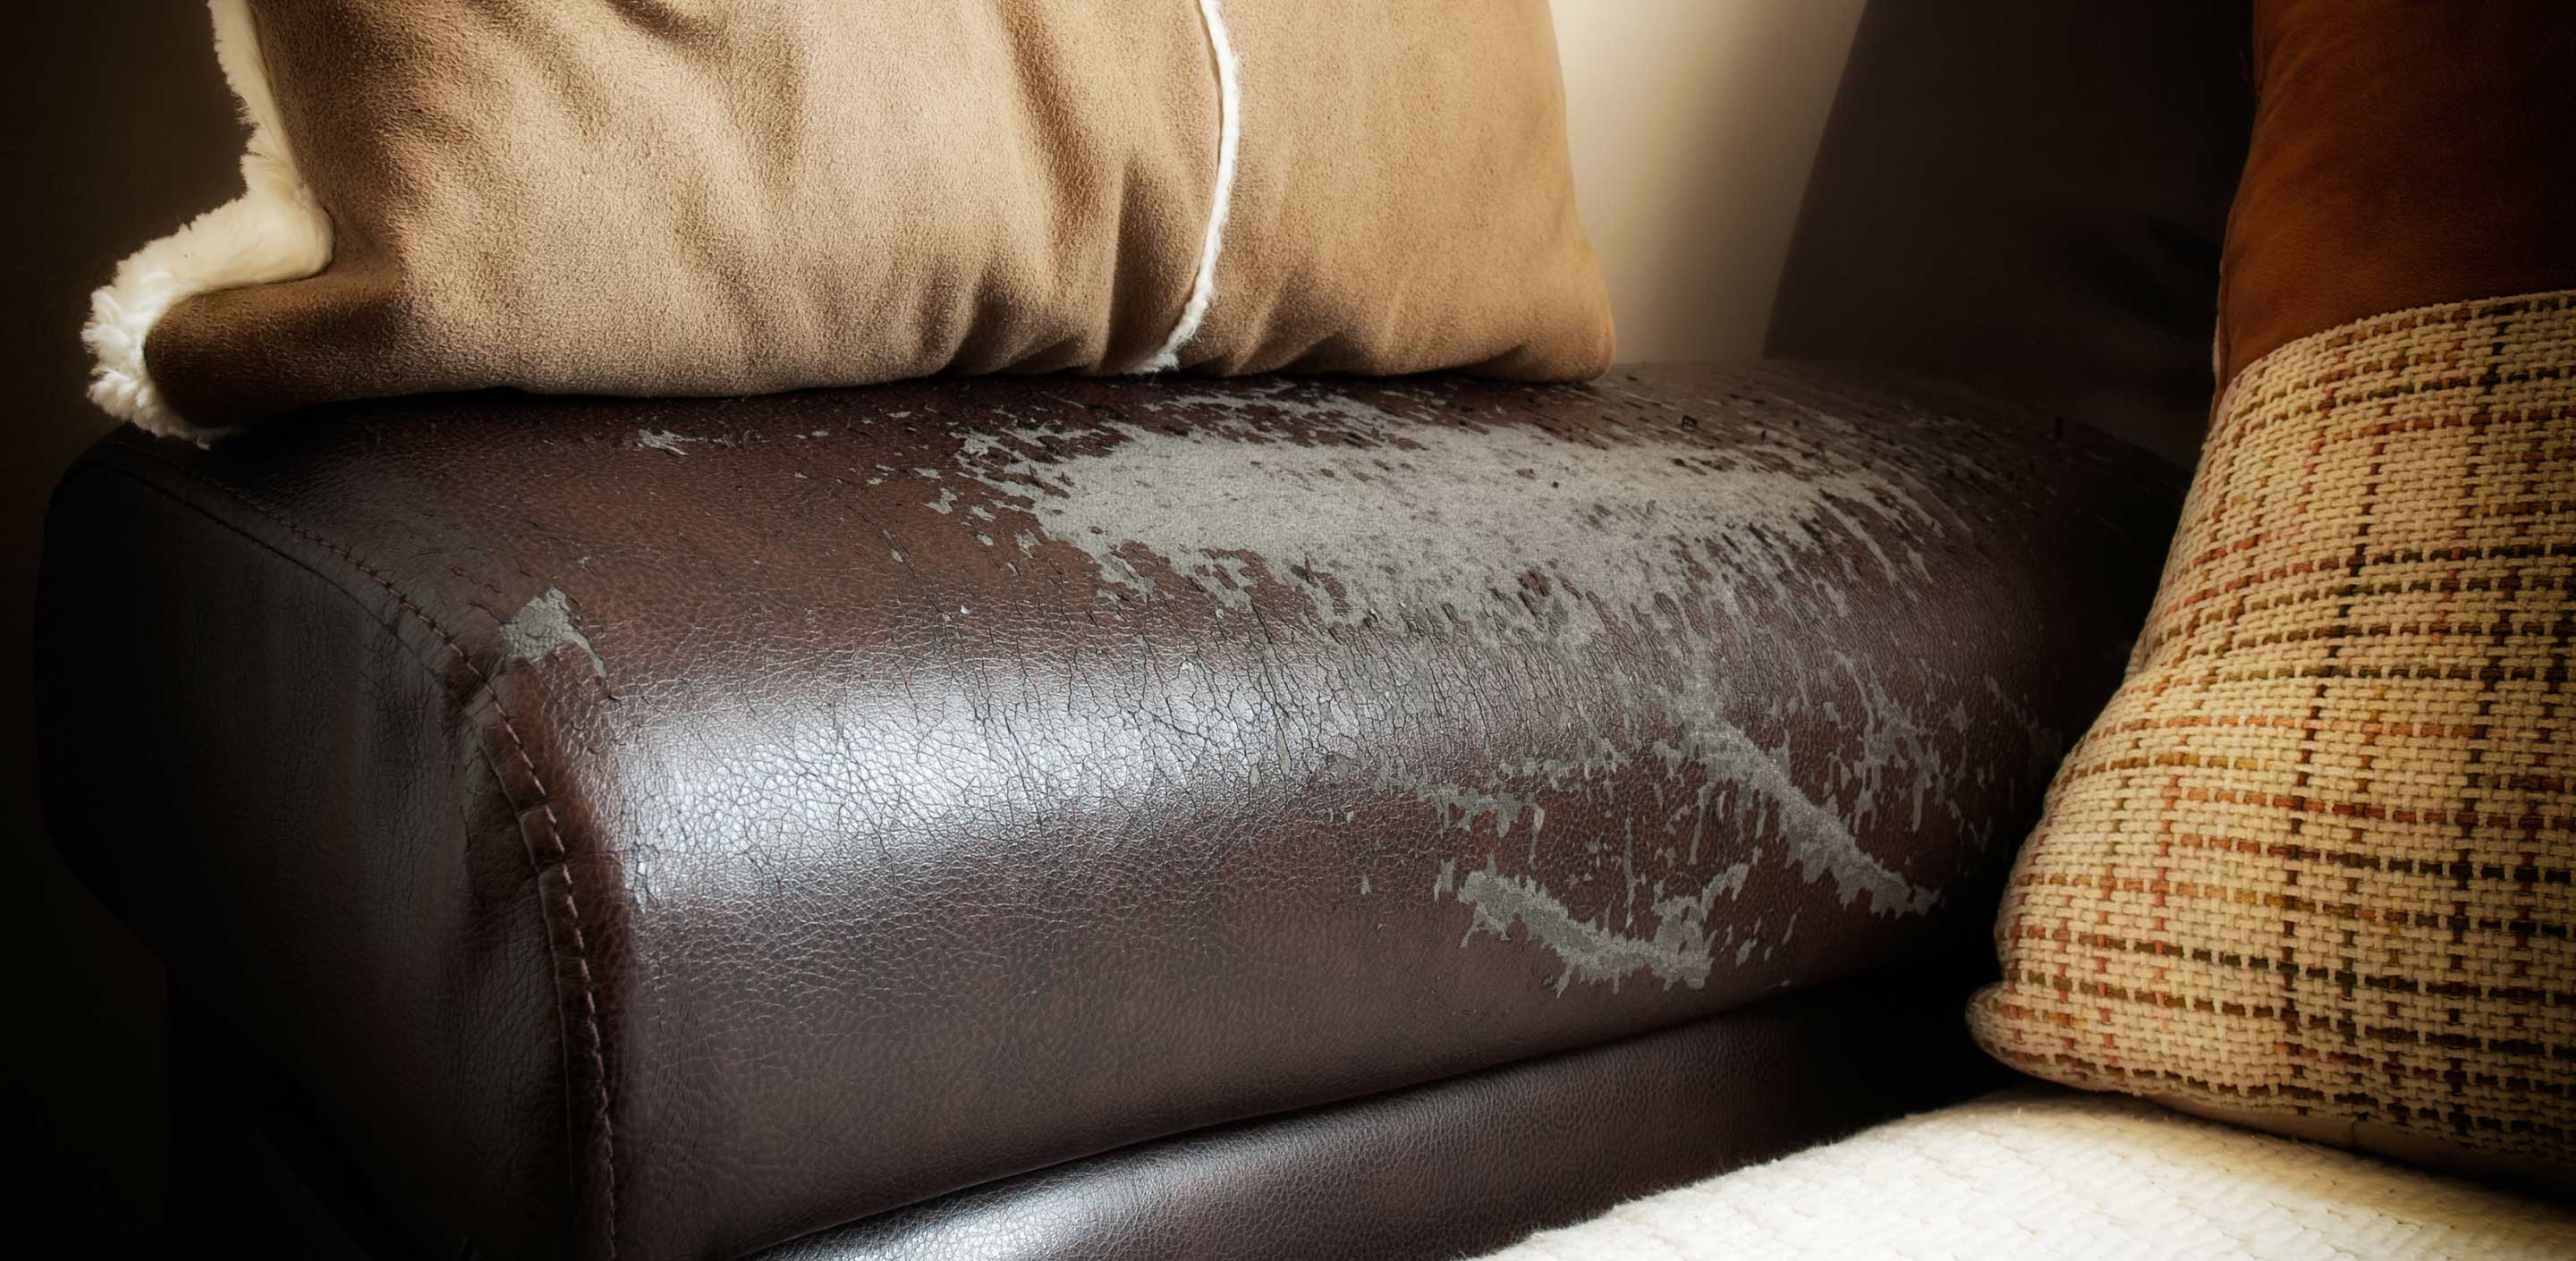 How To Fix Leather Couch Is Peeling